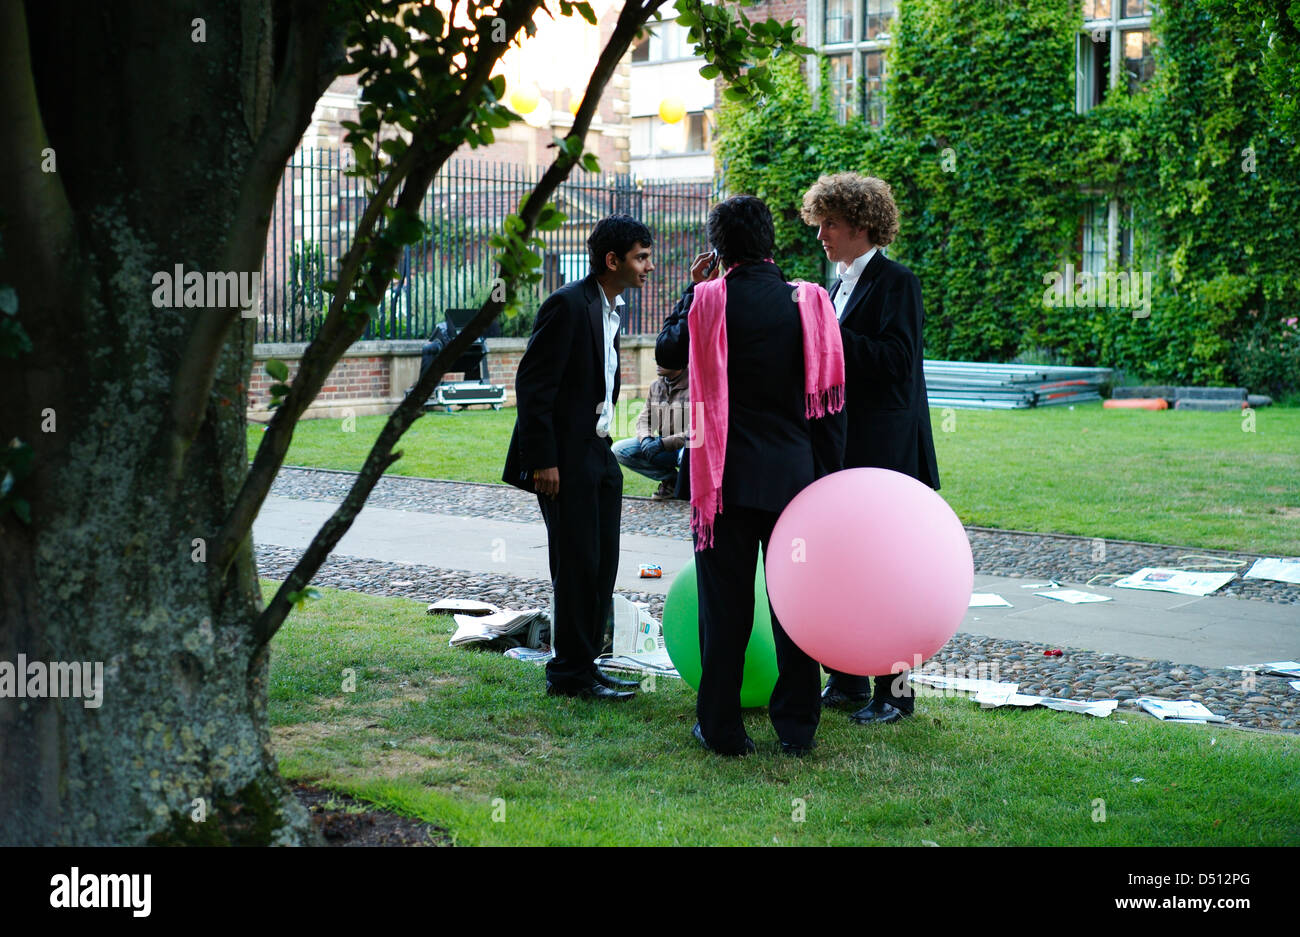 Cambridge Students May Ball,Cambridge,England,June 2010. Students in the early morning light after College May Ball. Stock Photo